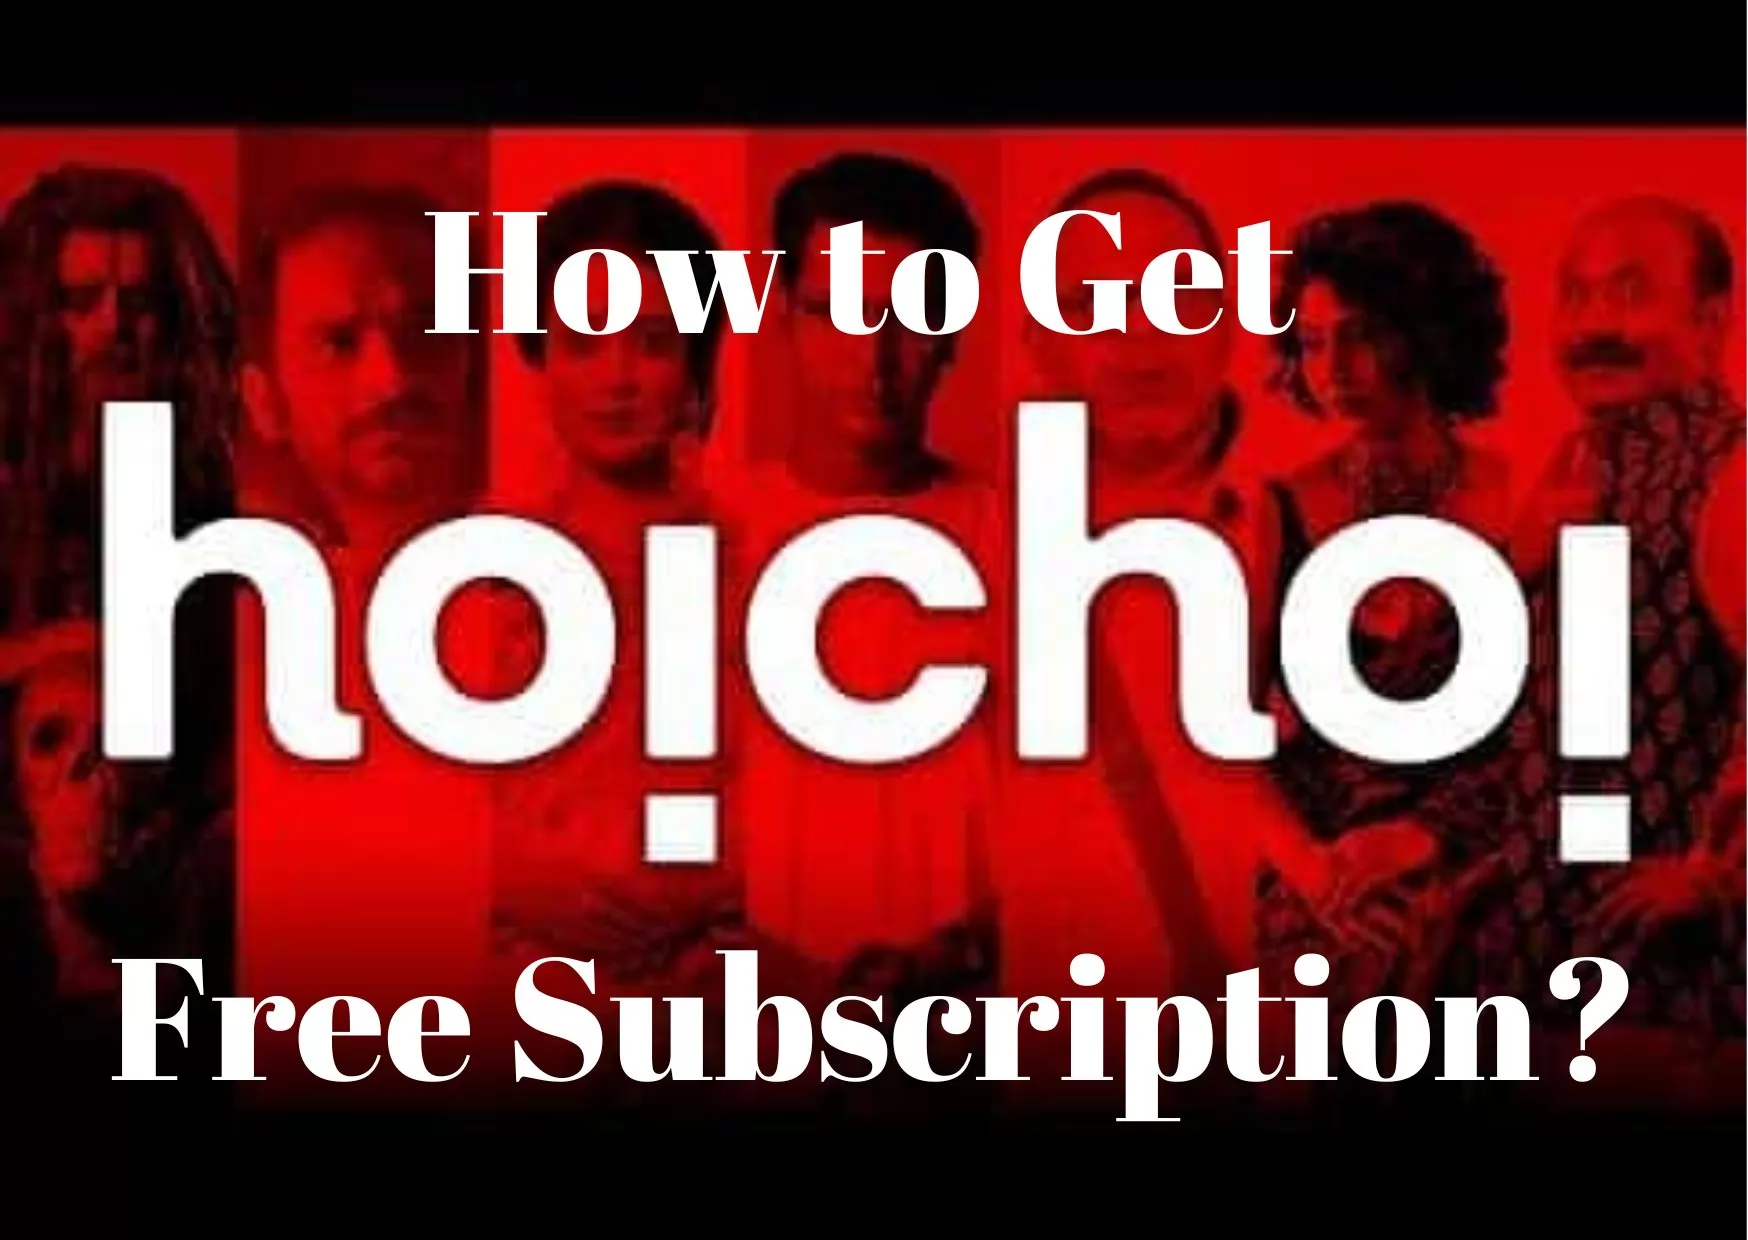 How to Get Hoichoi Free Subscription?